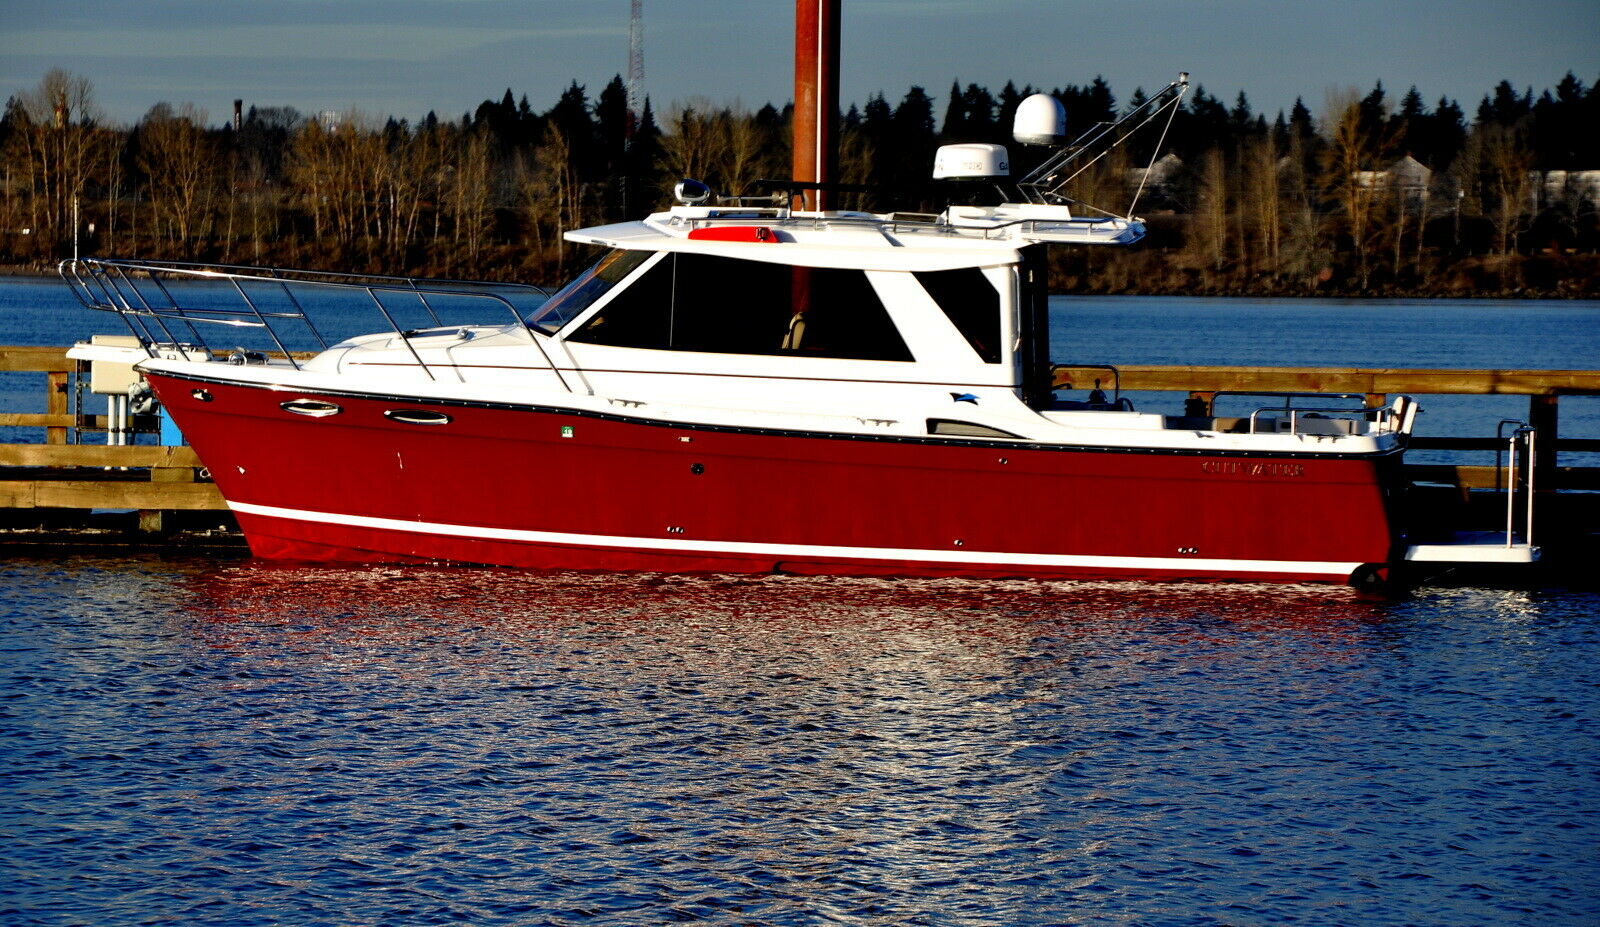 cutwater-28-2016-for-sale-for-165-000-boats-from-usa